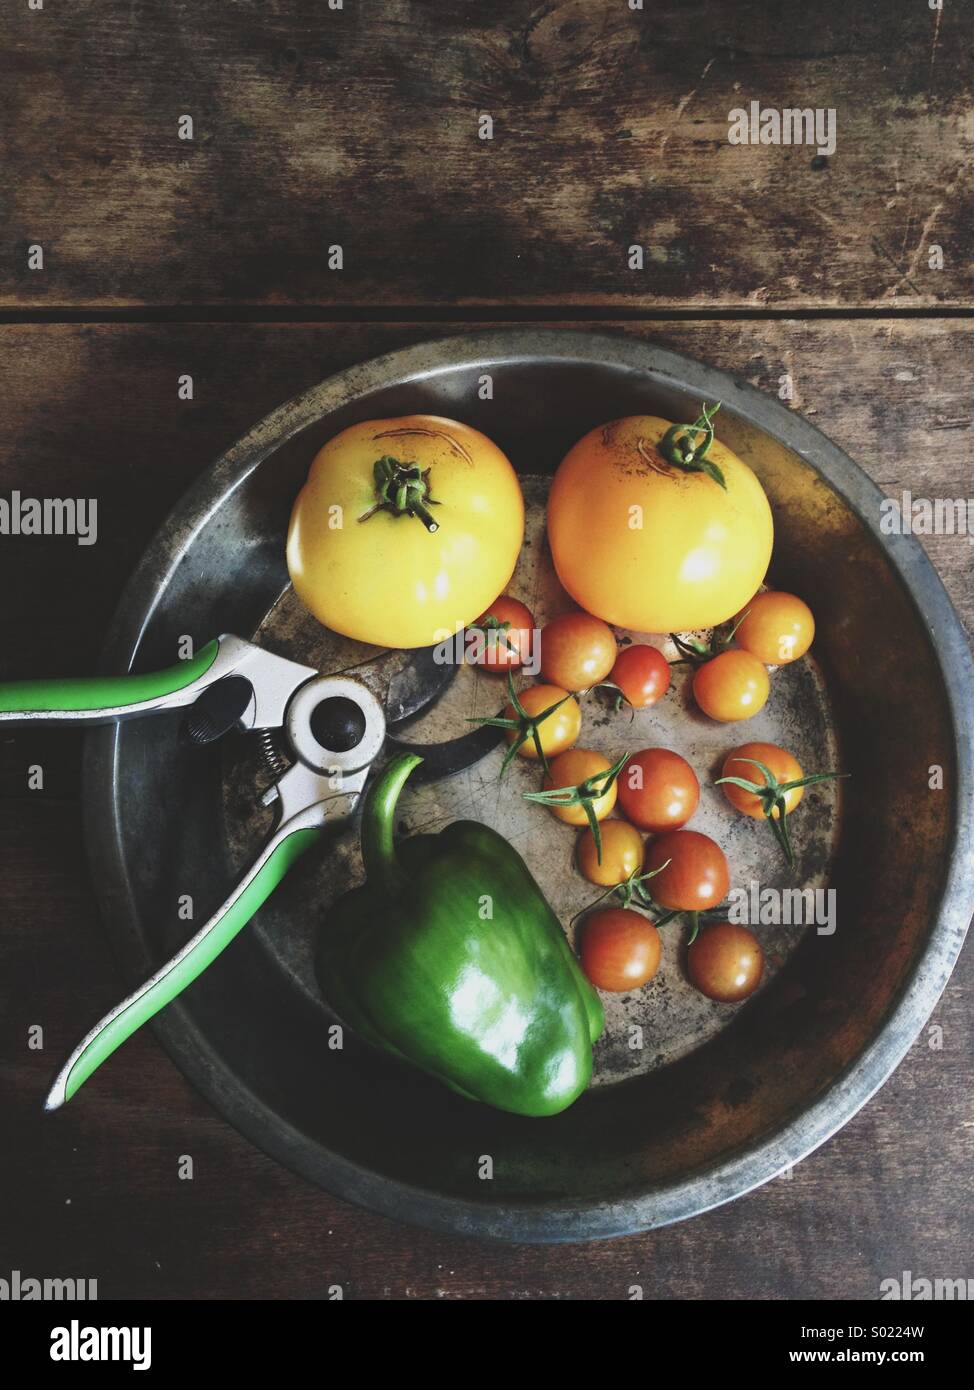 Vegetables harvested from an urban garden. Stock Photo